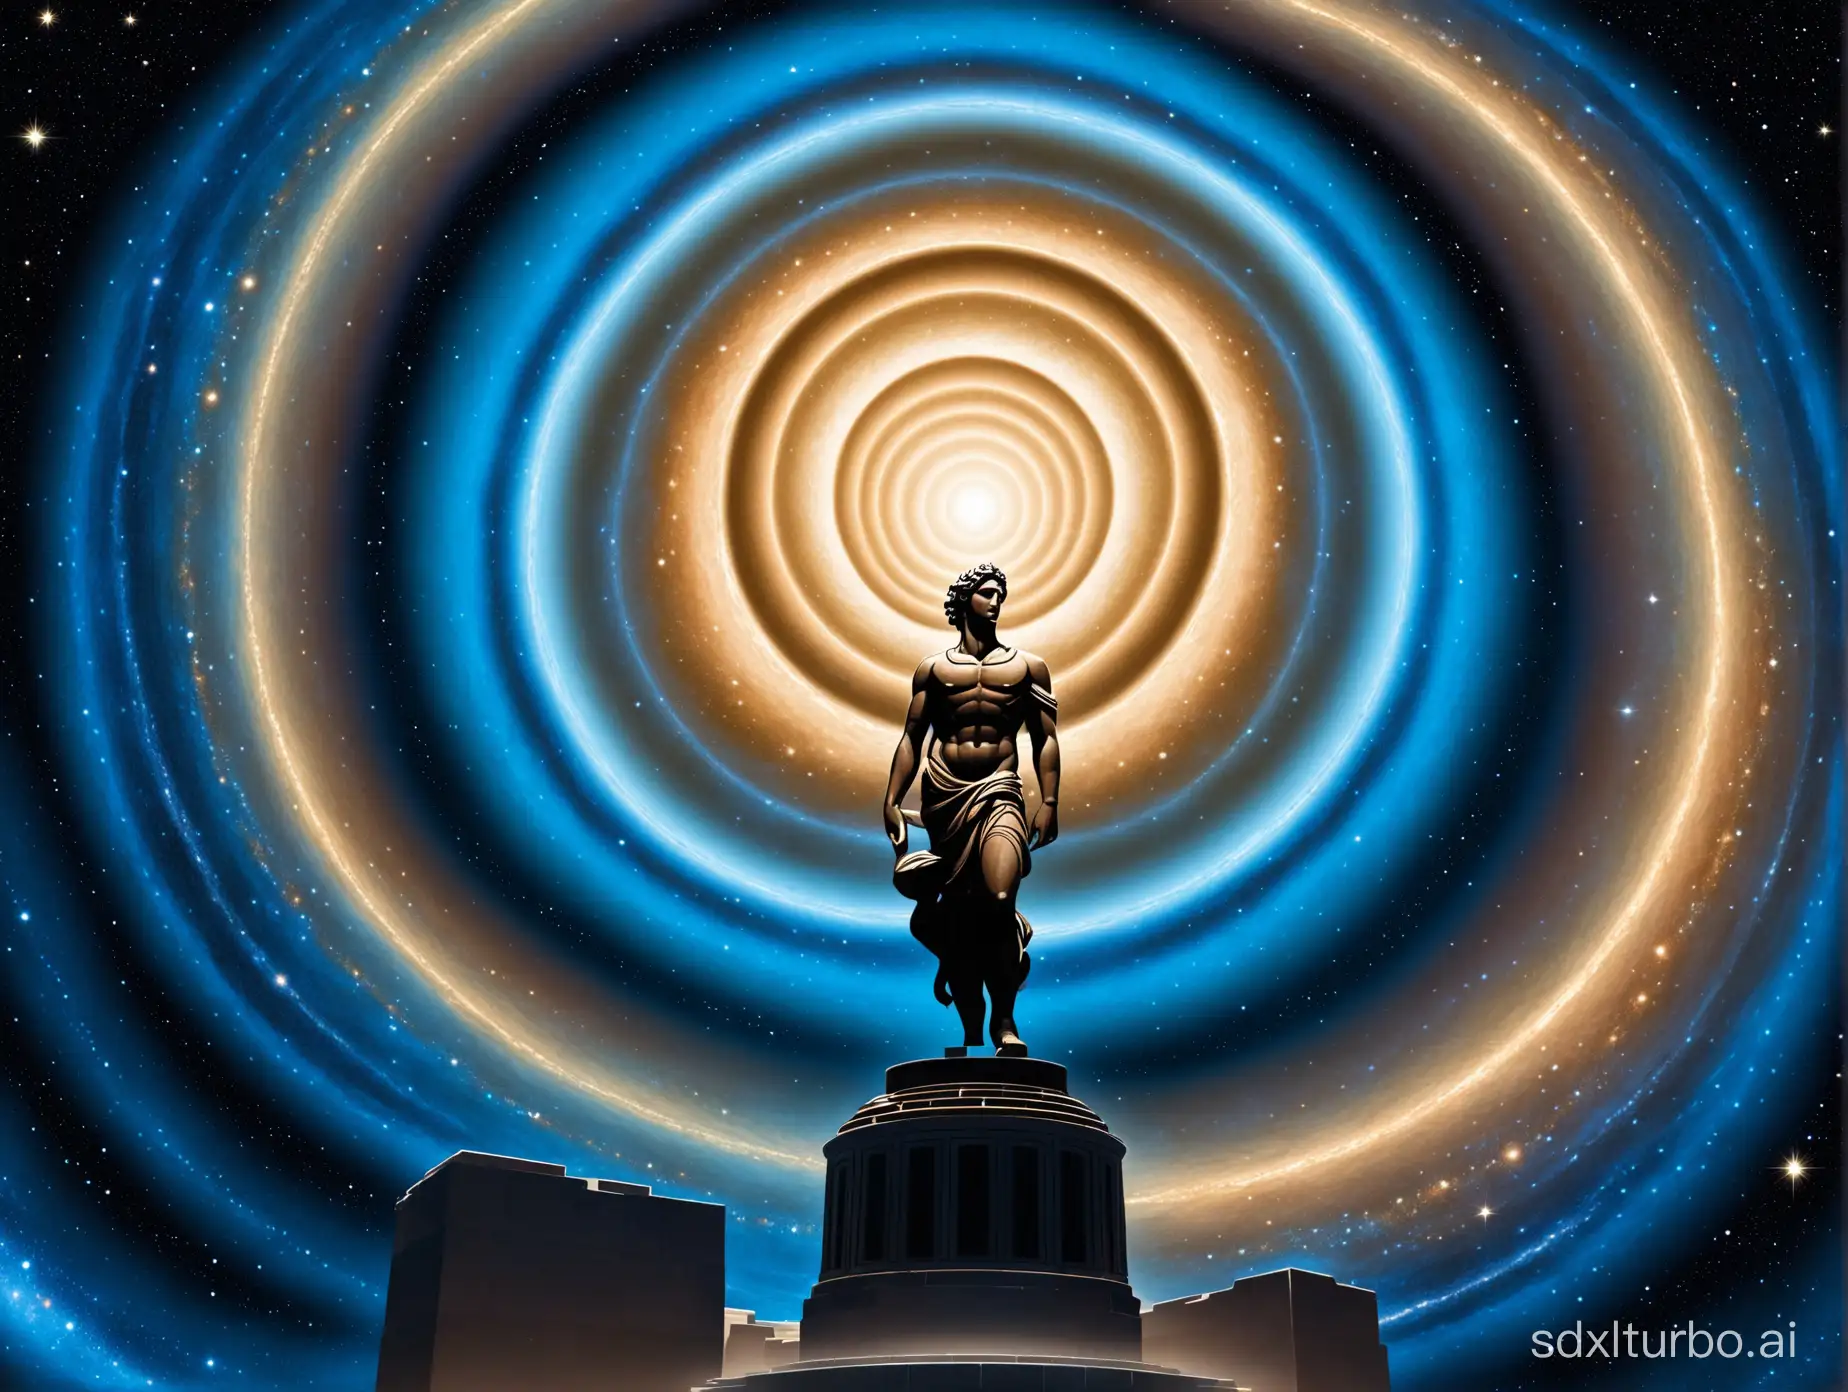 Greek god statue with the universe spiraling behind it